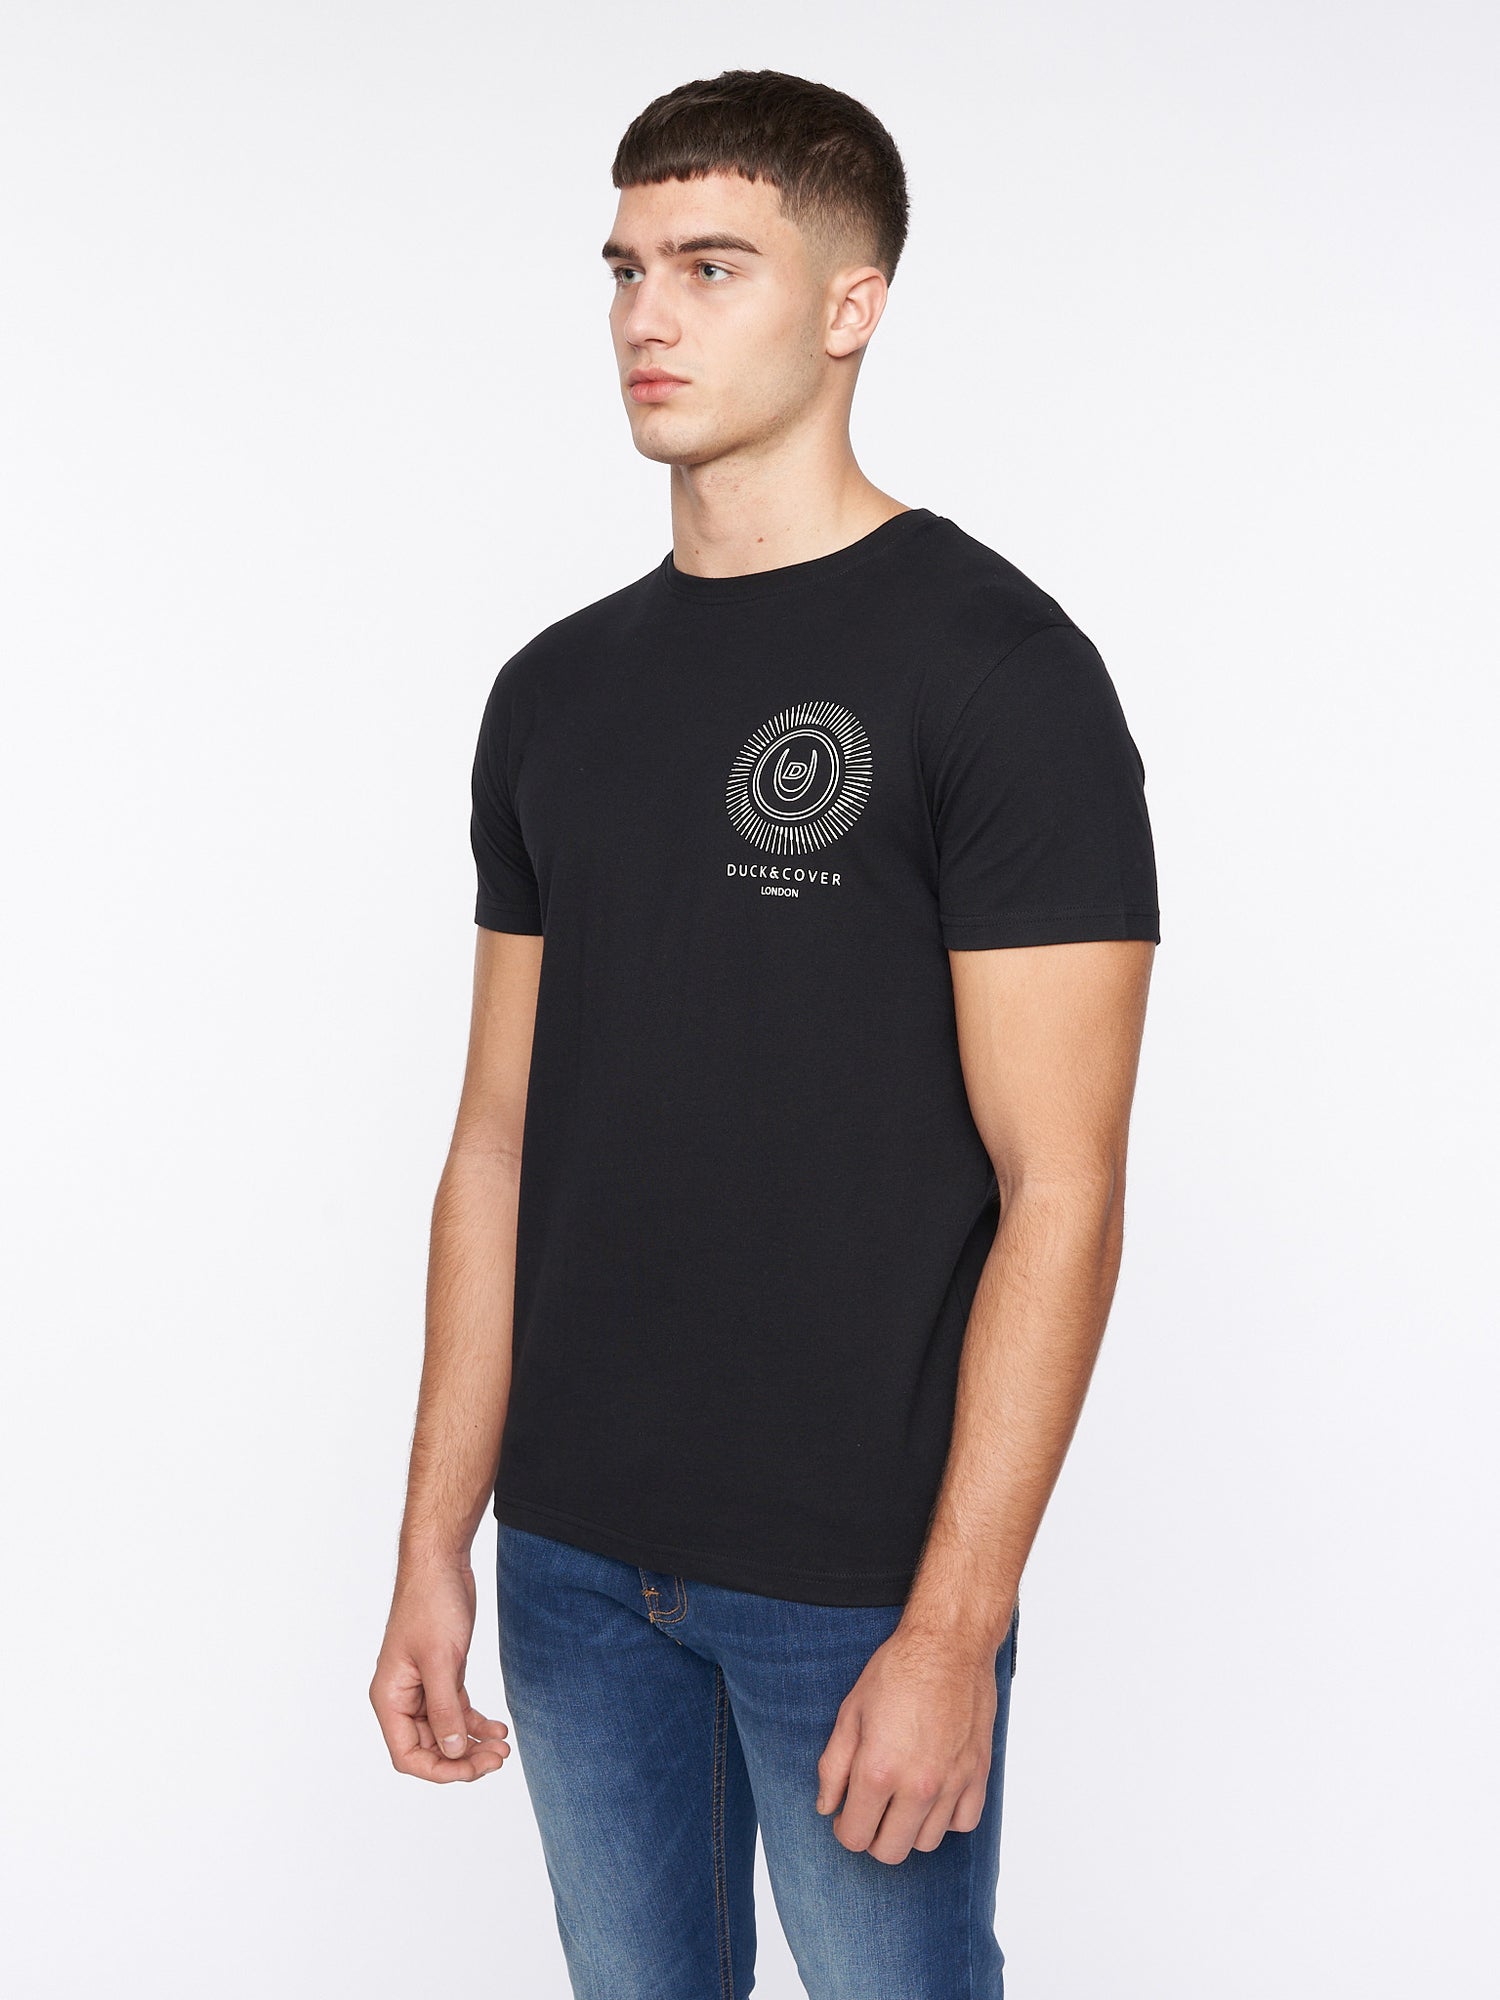 Duck & Cover - Mens Swirla T-Shirt Black – Duck and Cover